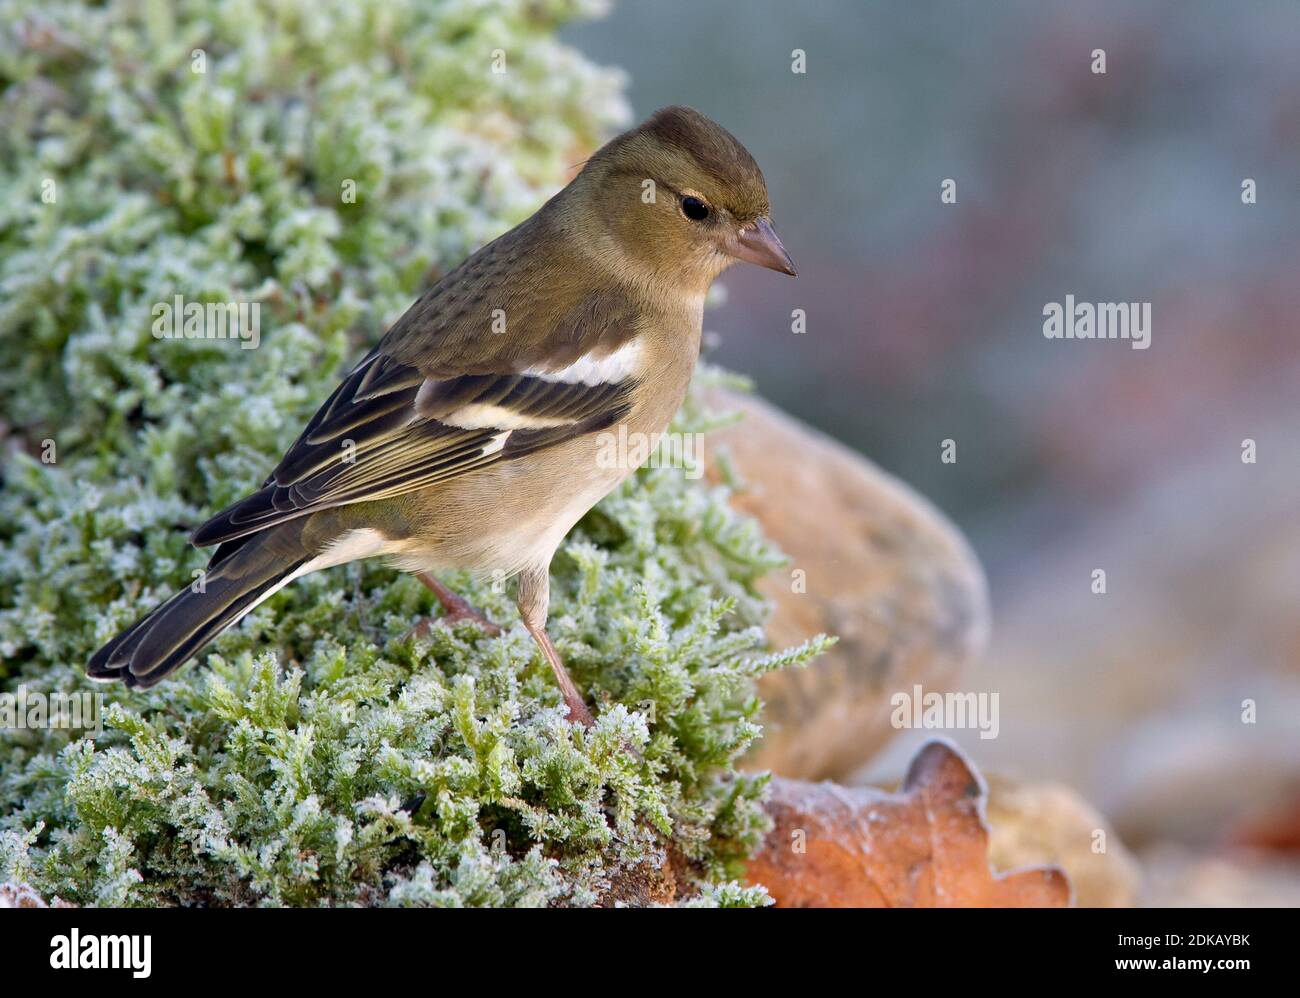 Vrouwtje Vink; Female Common Chaffinch Stock Photo - Alamy